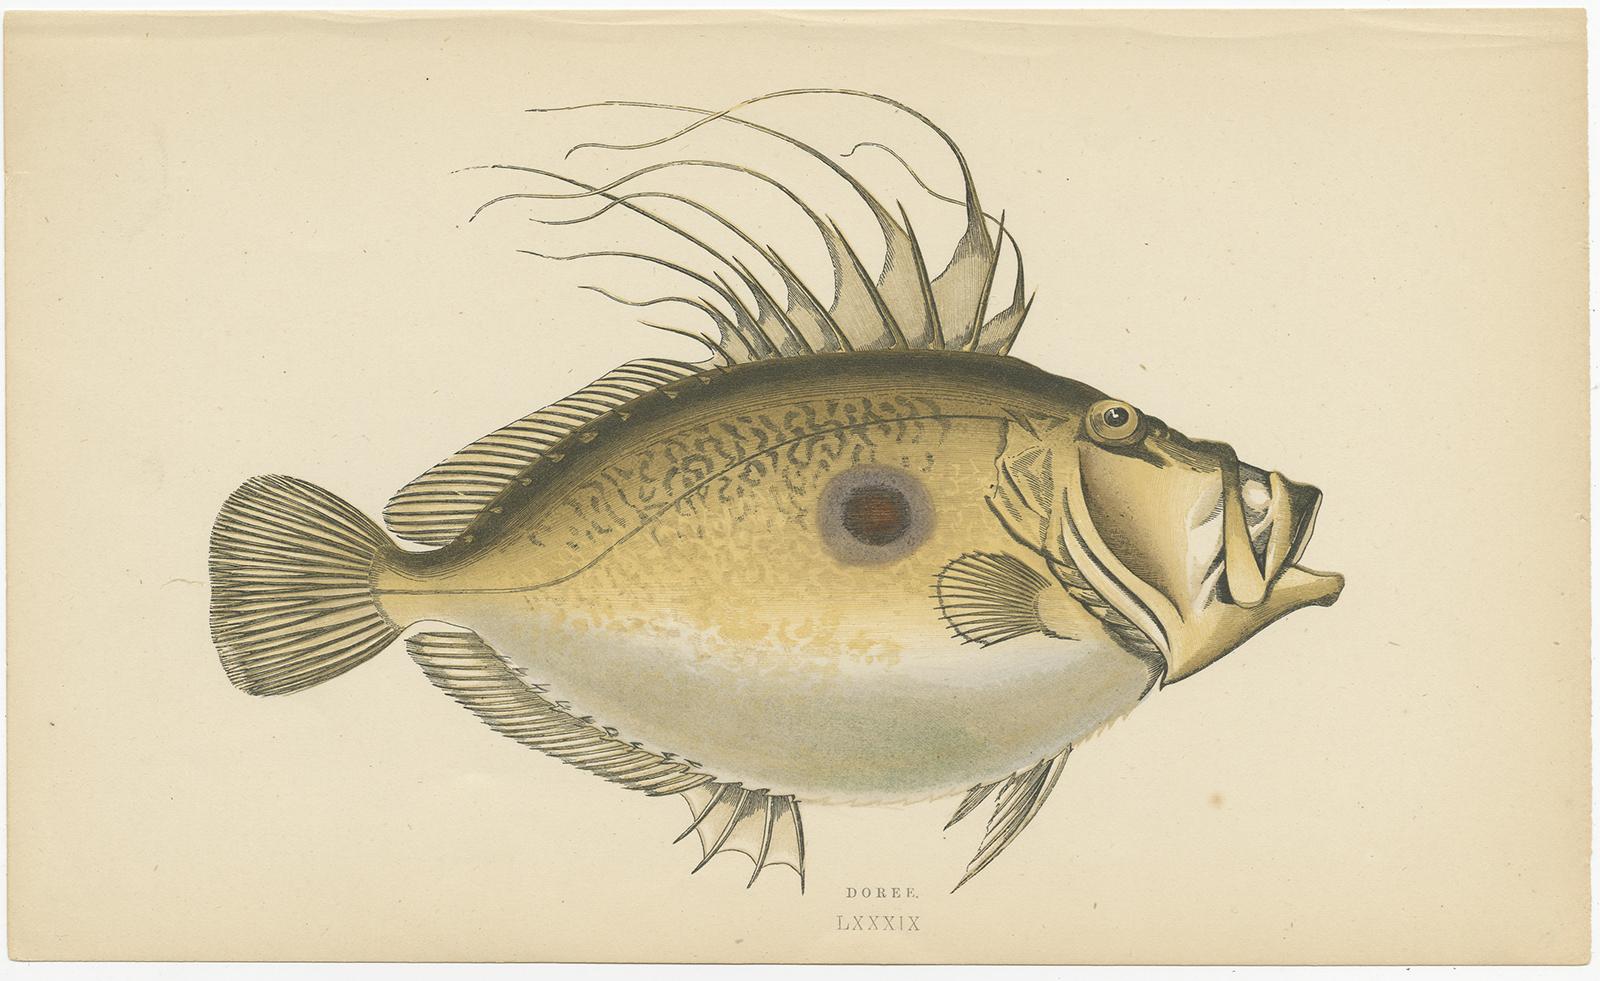 Antique fish print titled 'Doree'. This print originates from 'Fishes of the British Islands' by Jonathan Couch. Jonathan Couch (1789-1870) was one of the pioneering natural historians of the 19th century.